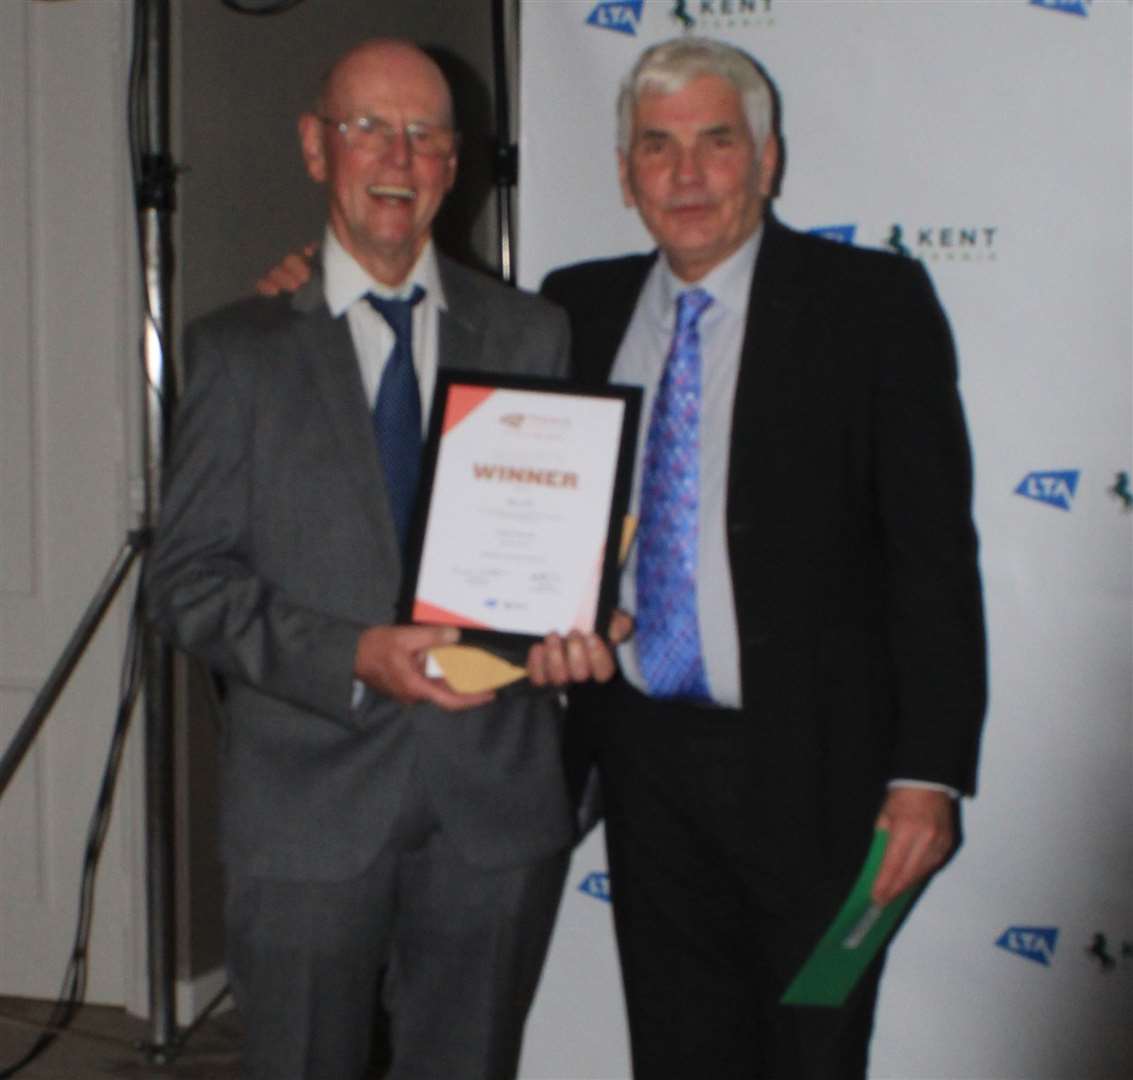 Graham Sutherland, left, of Wye LTC receives his Club-of-the-Year award (five or more courts) at the Kent Tennis awards ceremony from Tim Freeman of Trevor May Contractors